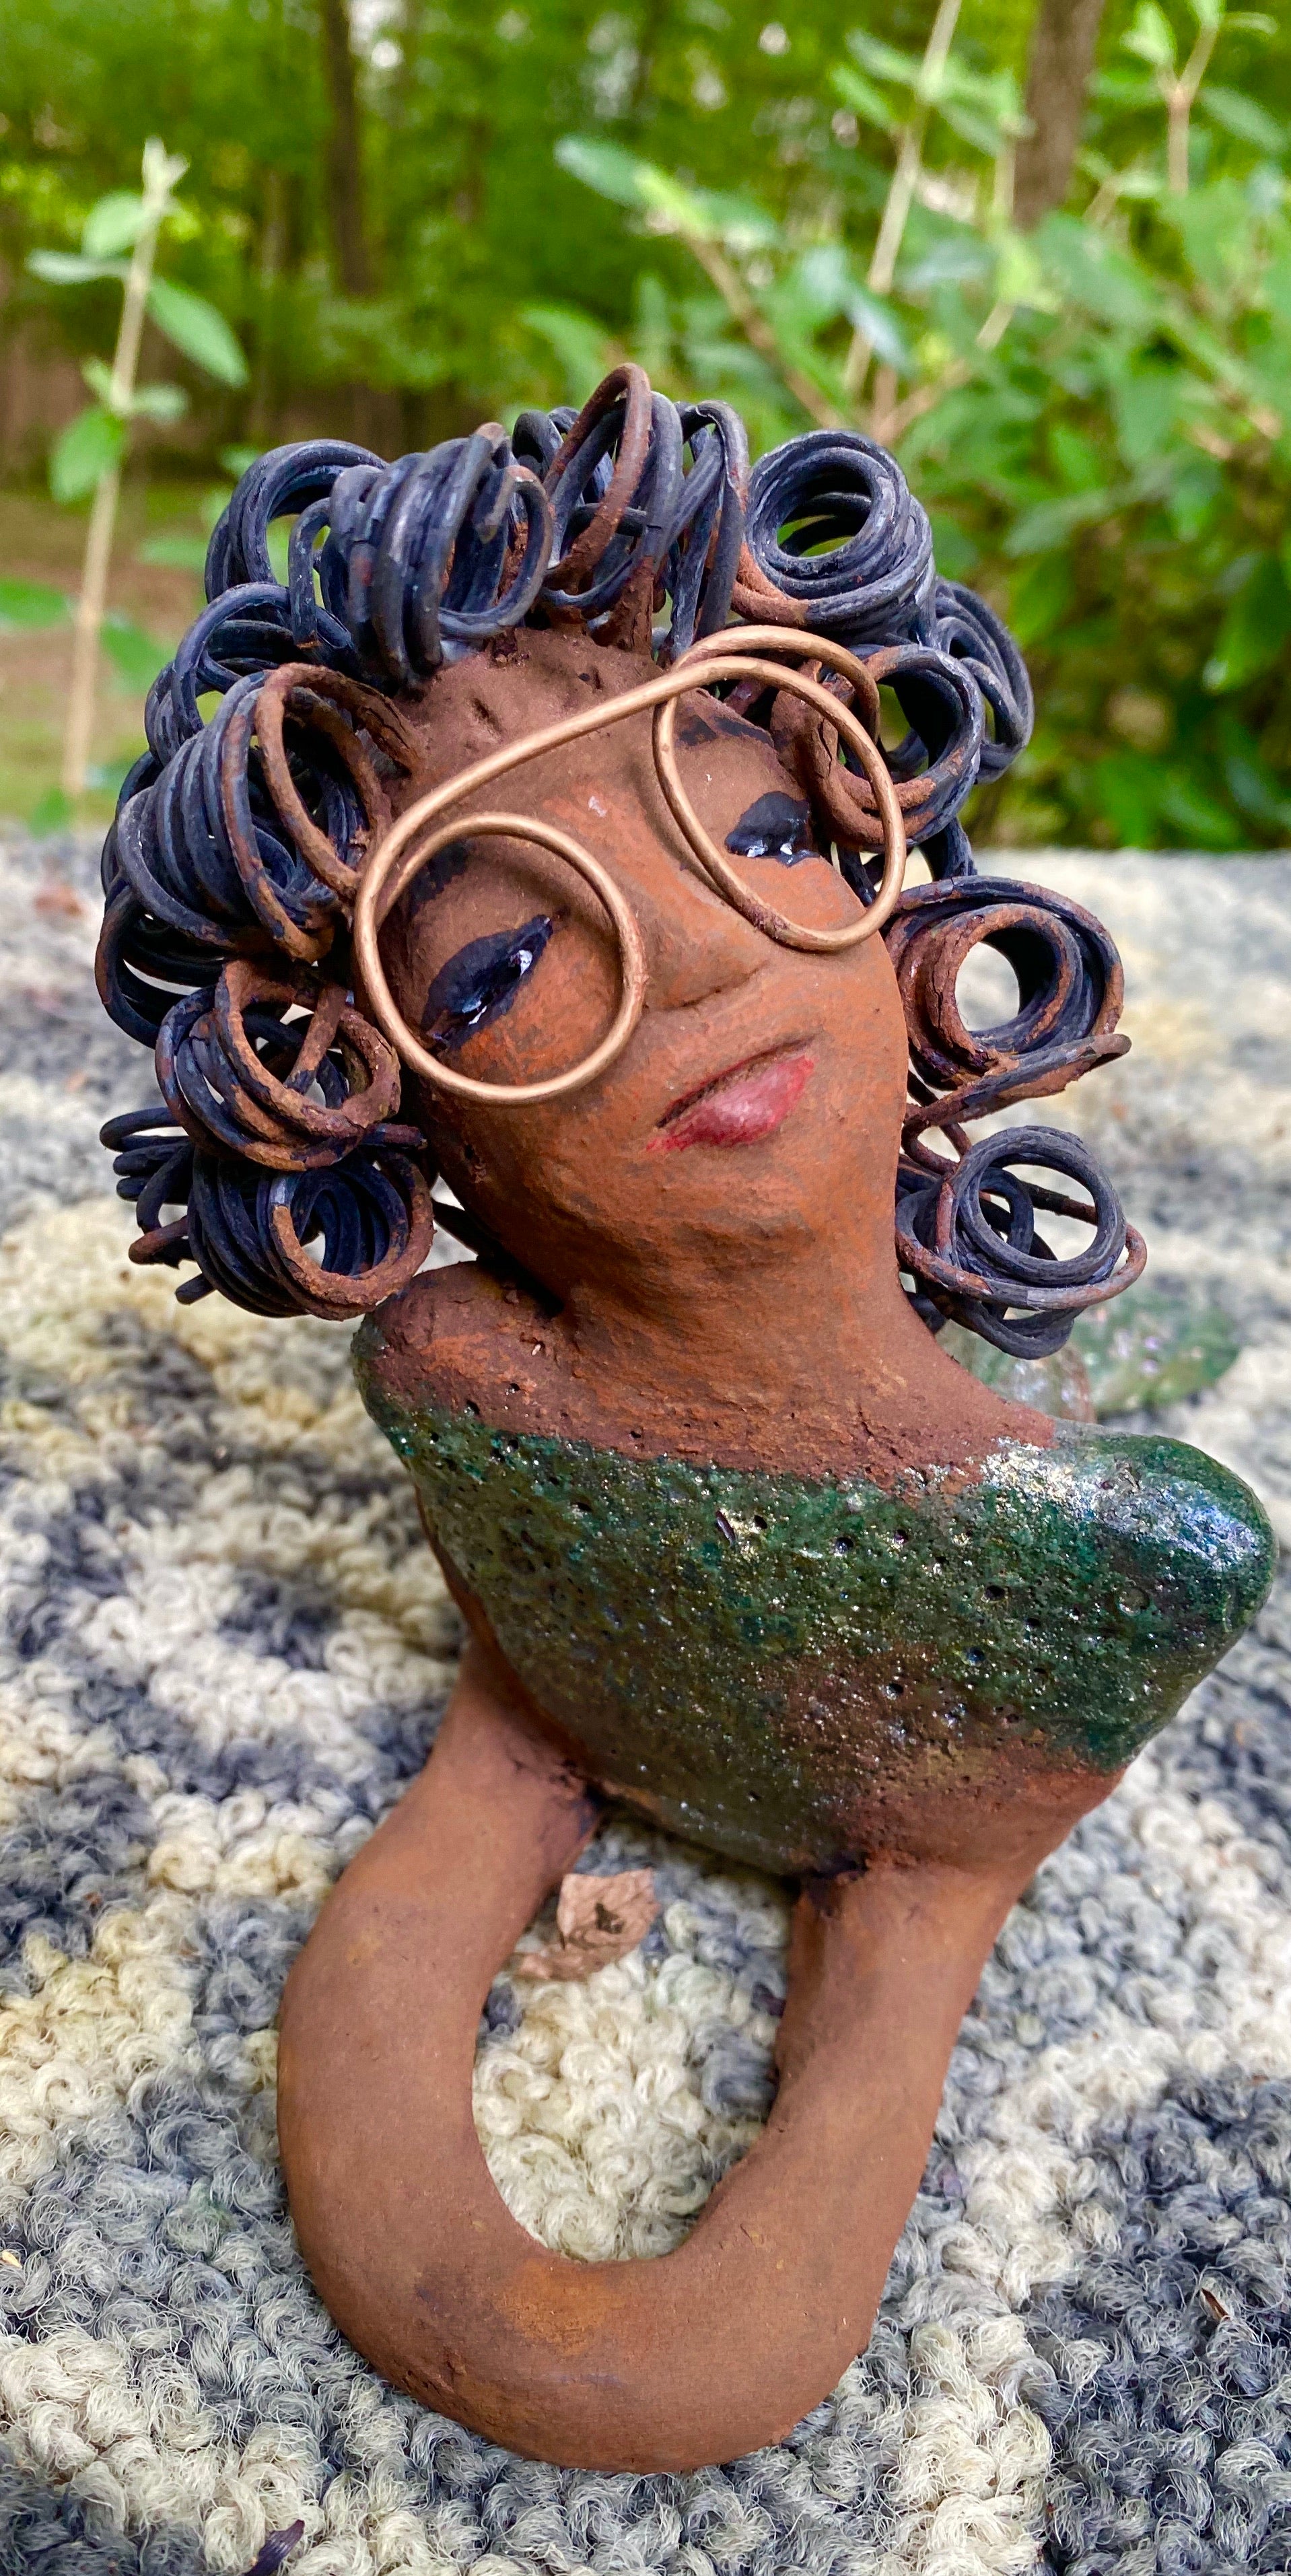 Meet Elma the Mermaid !﻿ Elma stands 6" x 8" x 4" and weighs 1.07 lbs. Elma has a lovely honey brown complexion. Elma's body has a copper green metallic glaze She has over 25 feet of curly wire hair. Elma looks up in anticipation of being a part of your home!